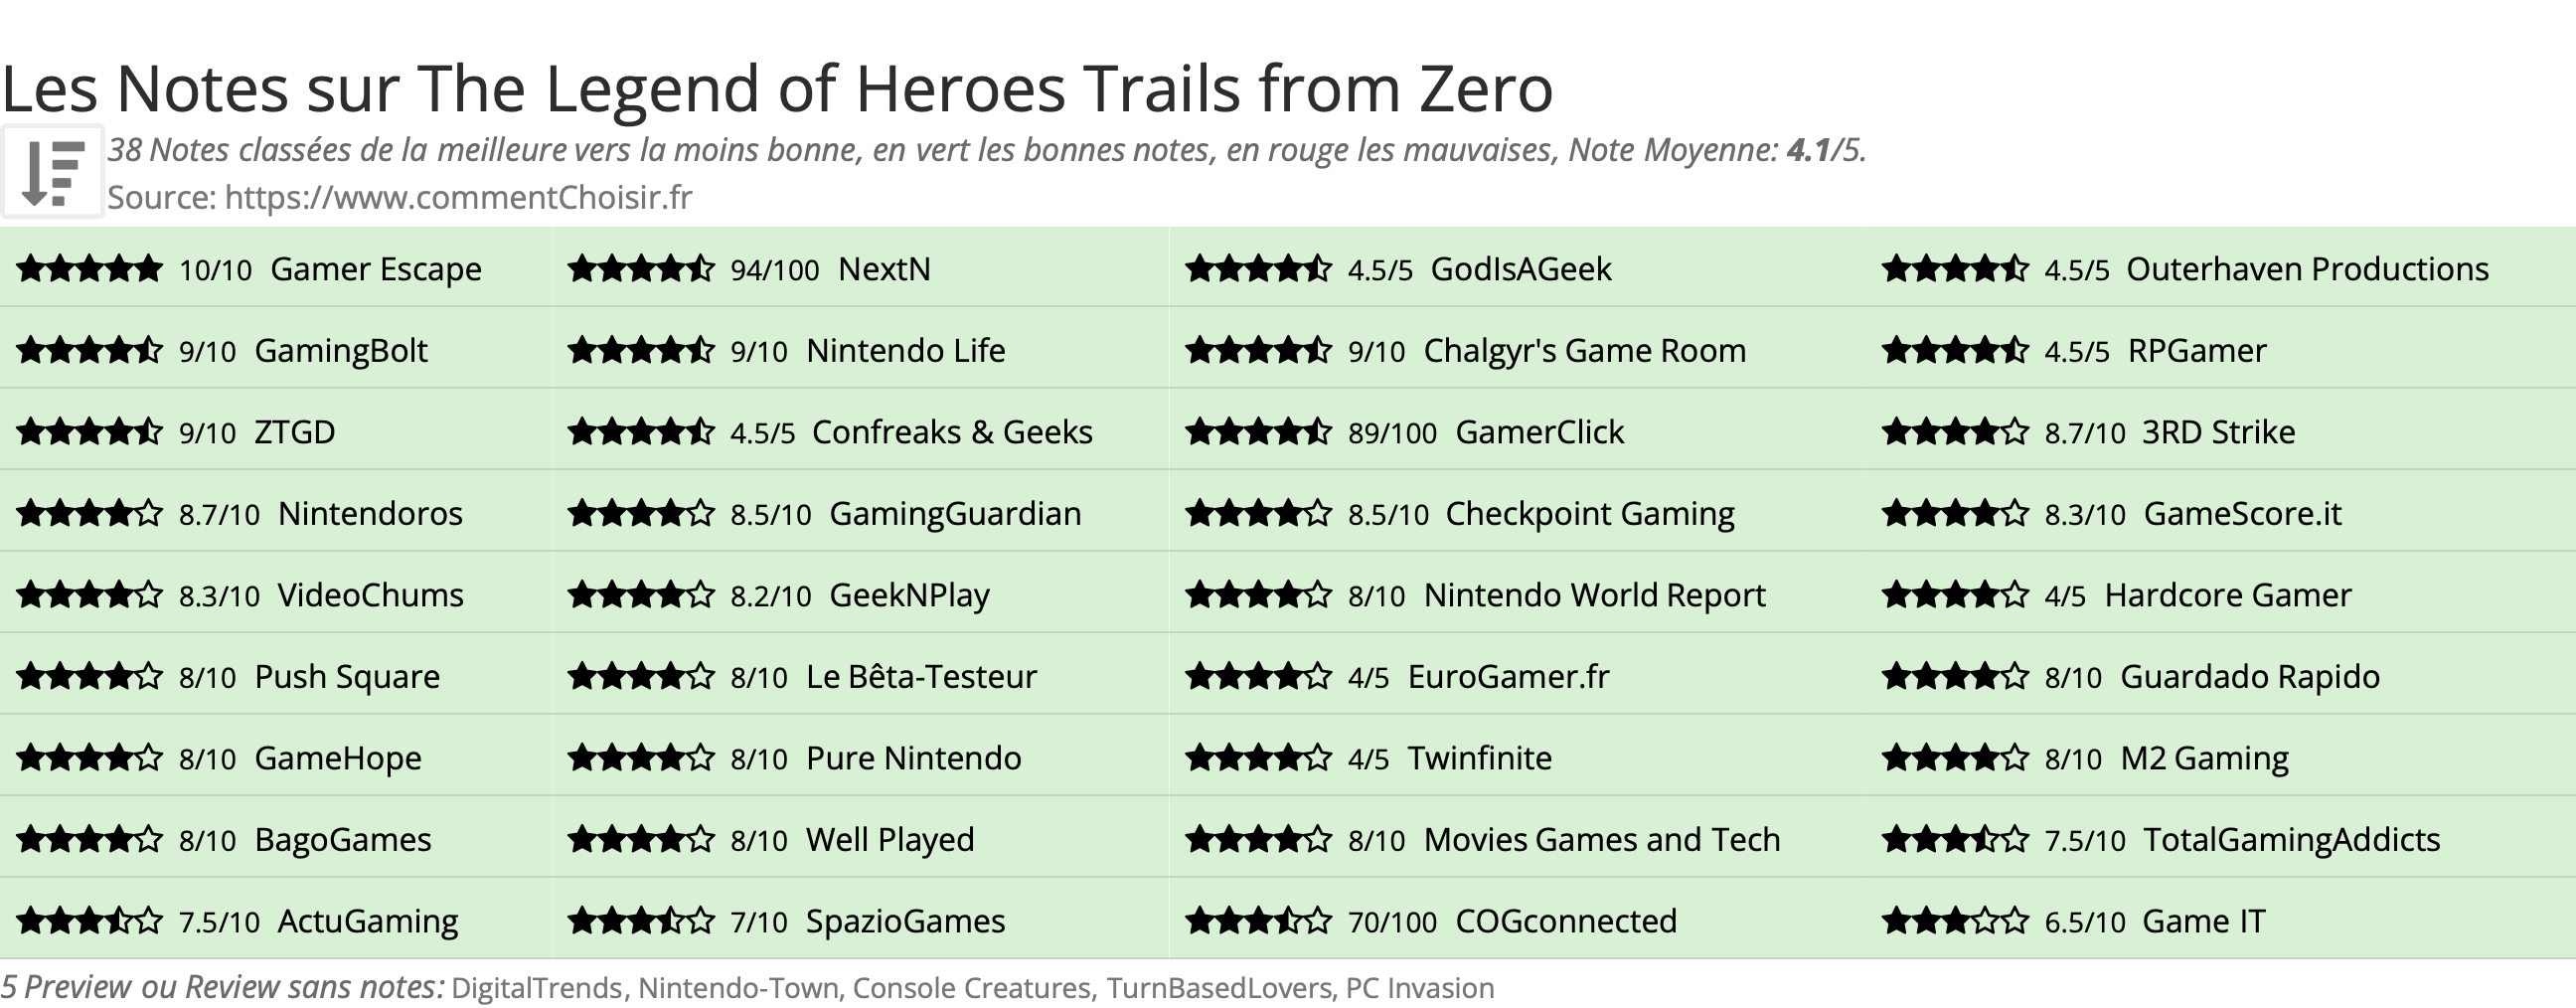 Ratings The Legend of Heroes Trails from Zero